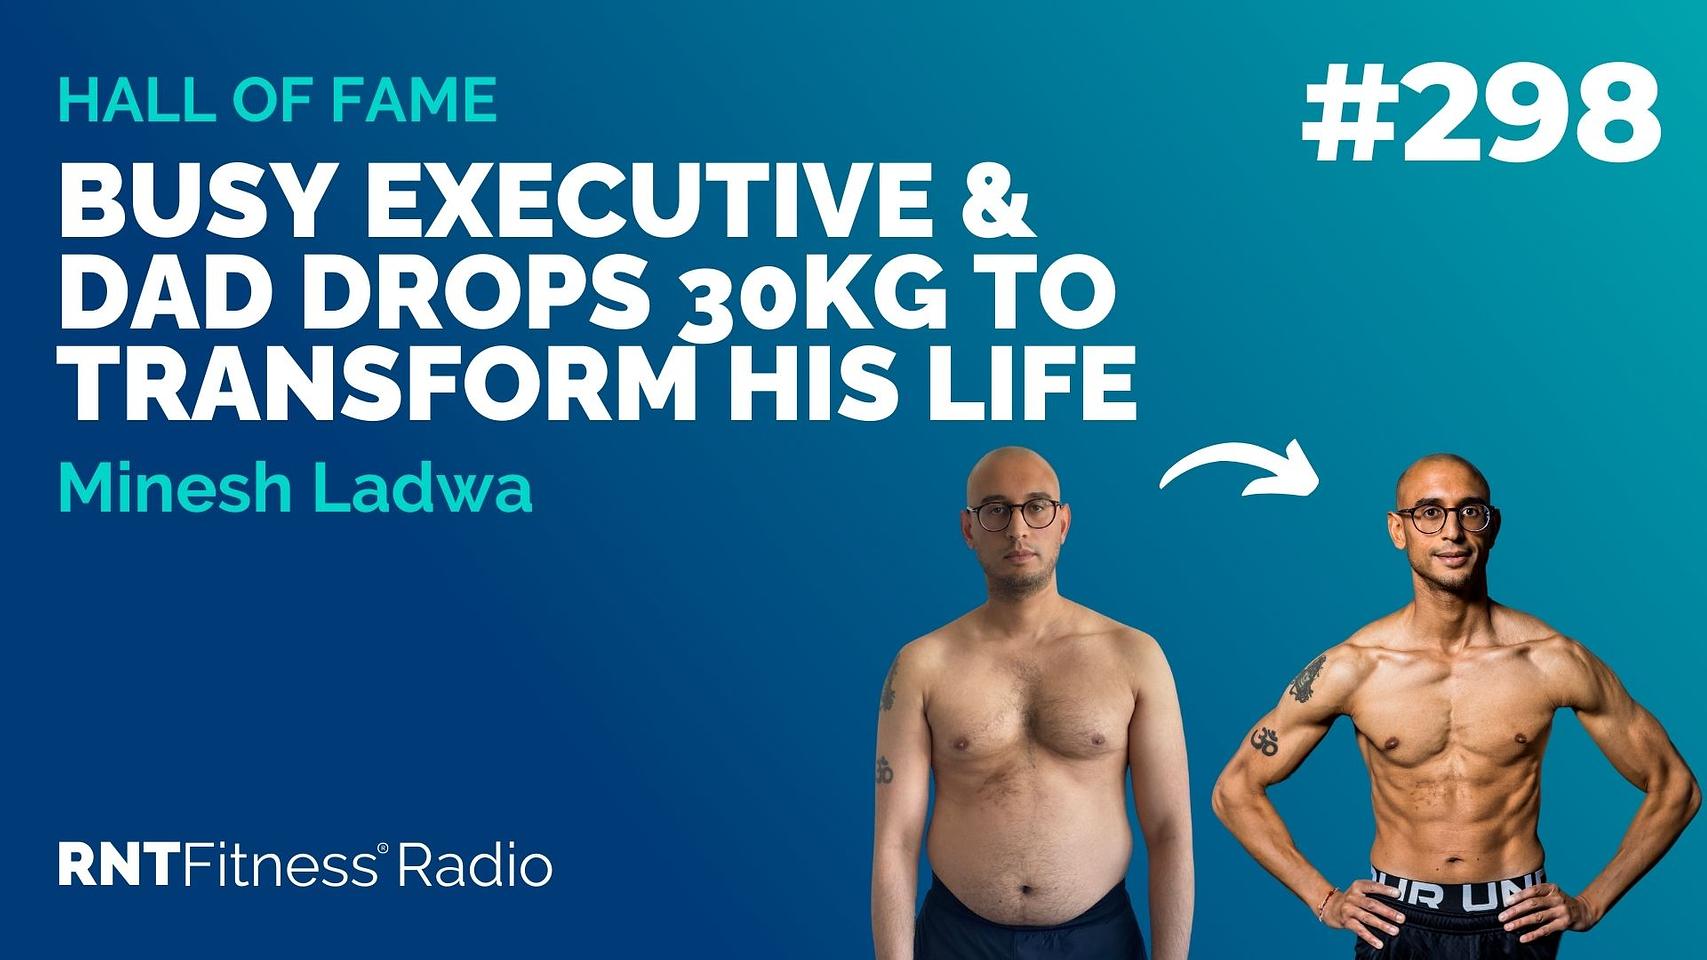 Ep 298 - Hall Of Fame | Minesh Ladwa: Busy Executive & Dad Drops 30kg To Transform His Life